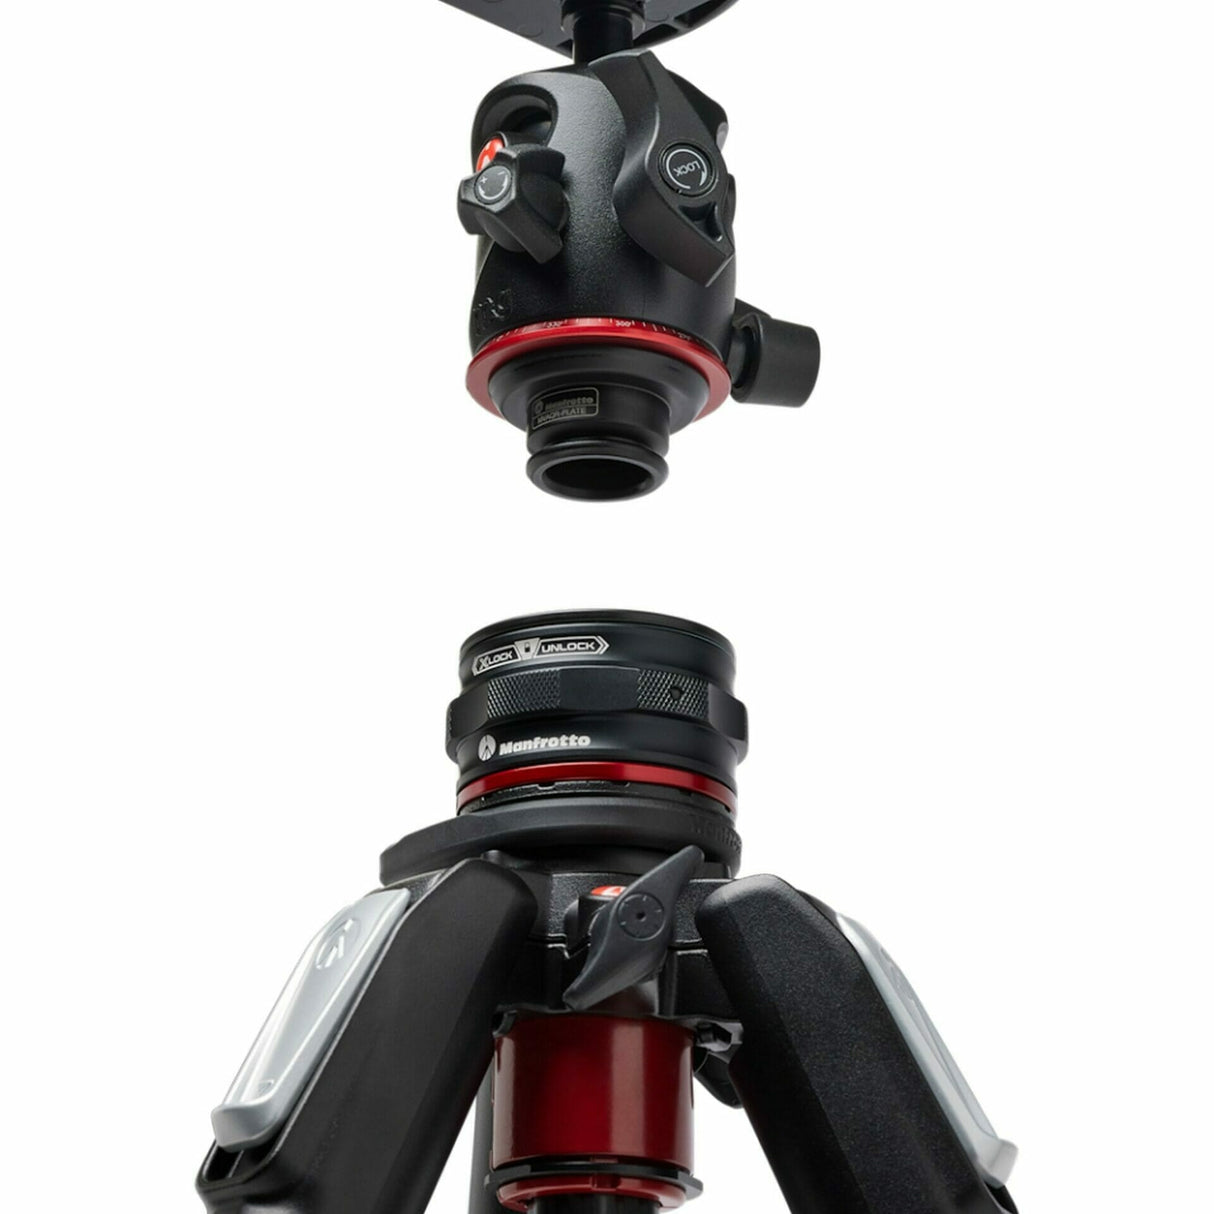 Manfrotto MK055CXPRO4BHQR Carbon 4-Section Tripod with XPRO Ball Head and MOVE